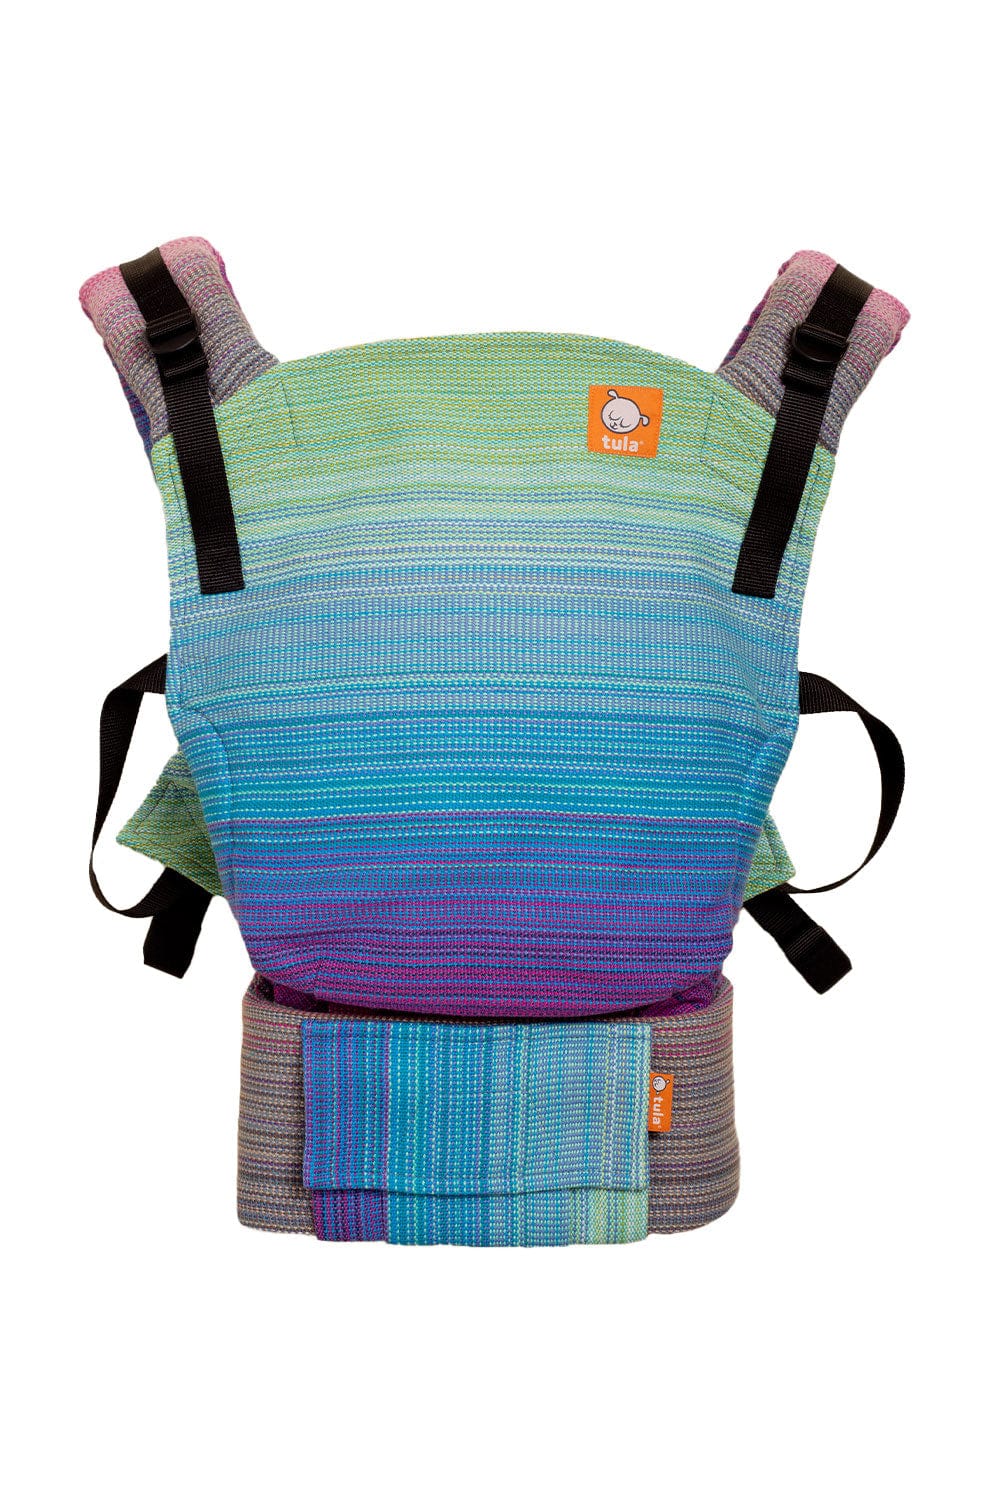 Tiny Speck, Big Universe - Signature Handwoven Free-to-Grow Baby Carrier